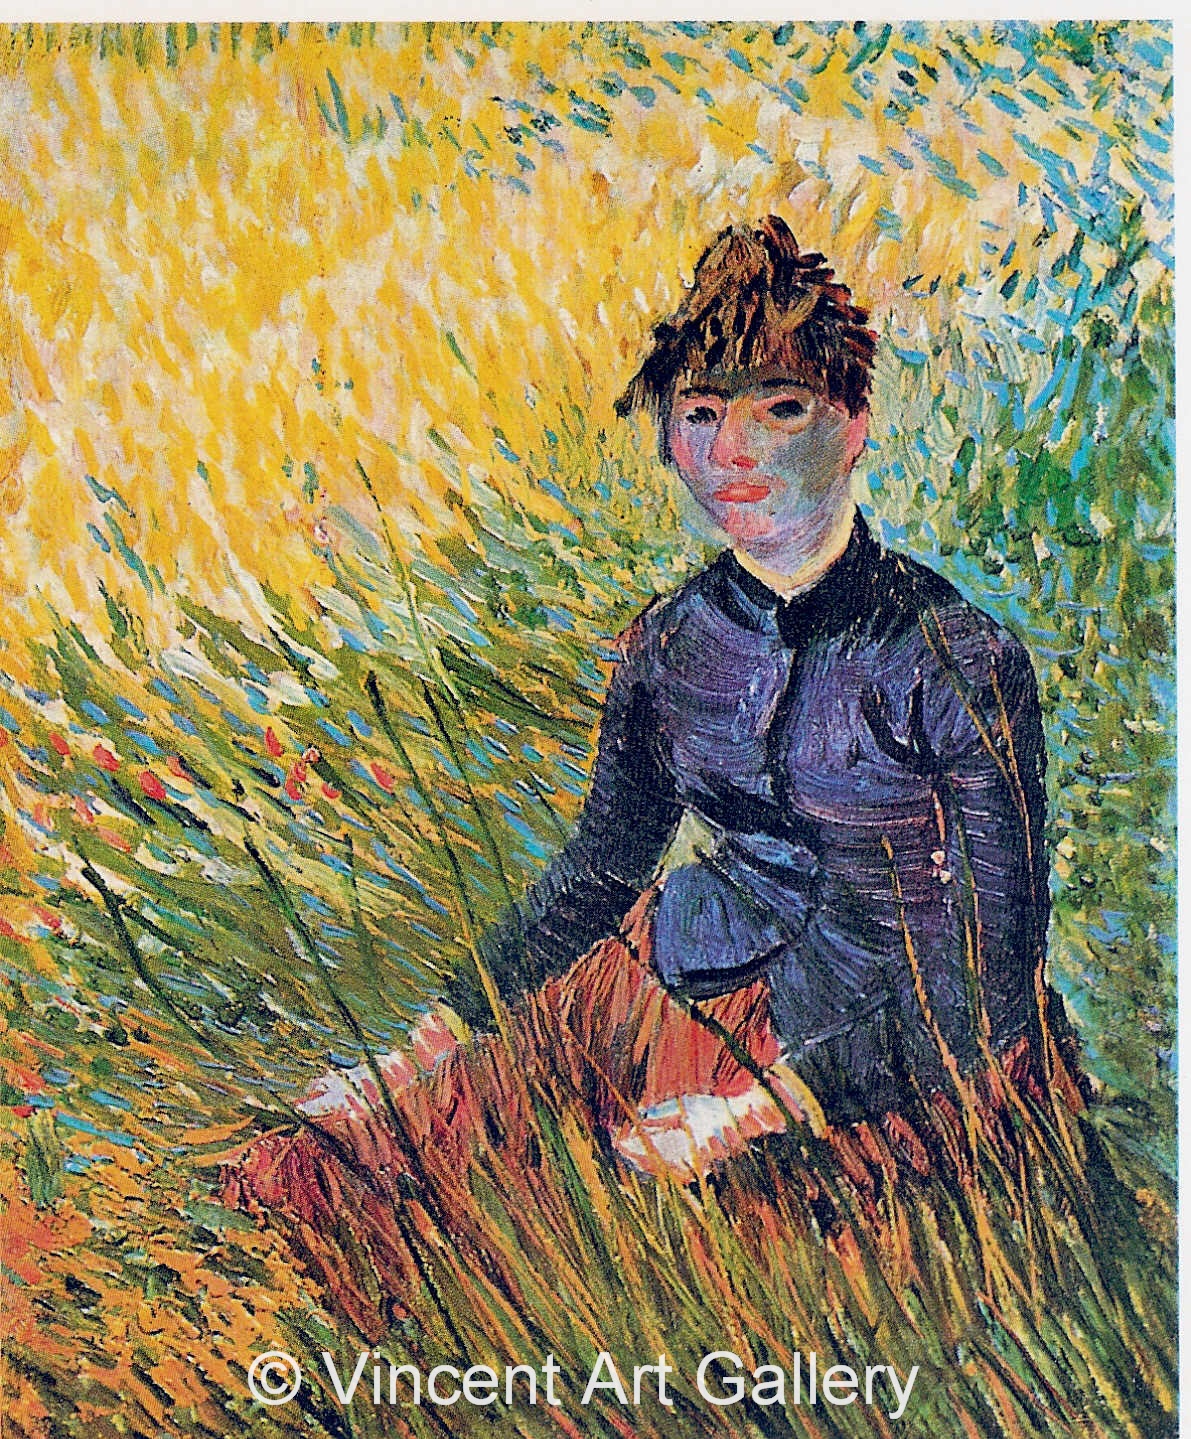 JH1261, Woman Sitting in the Grass